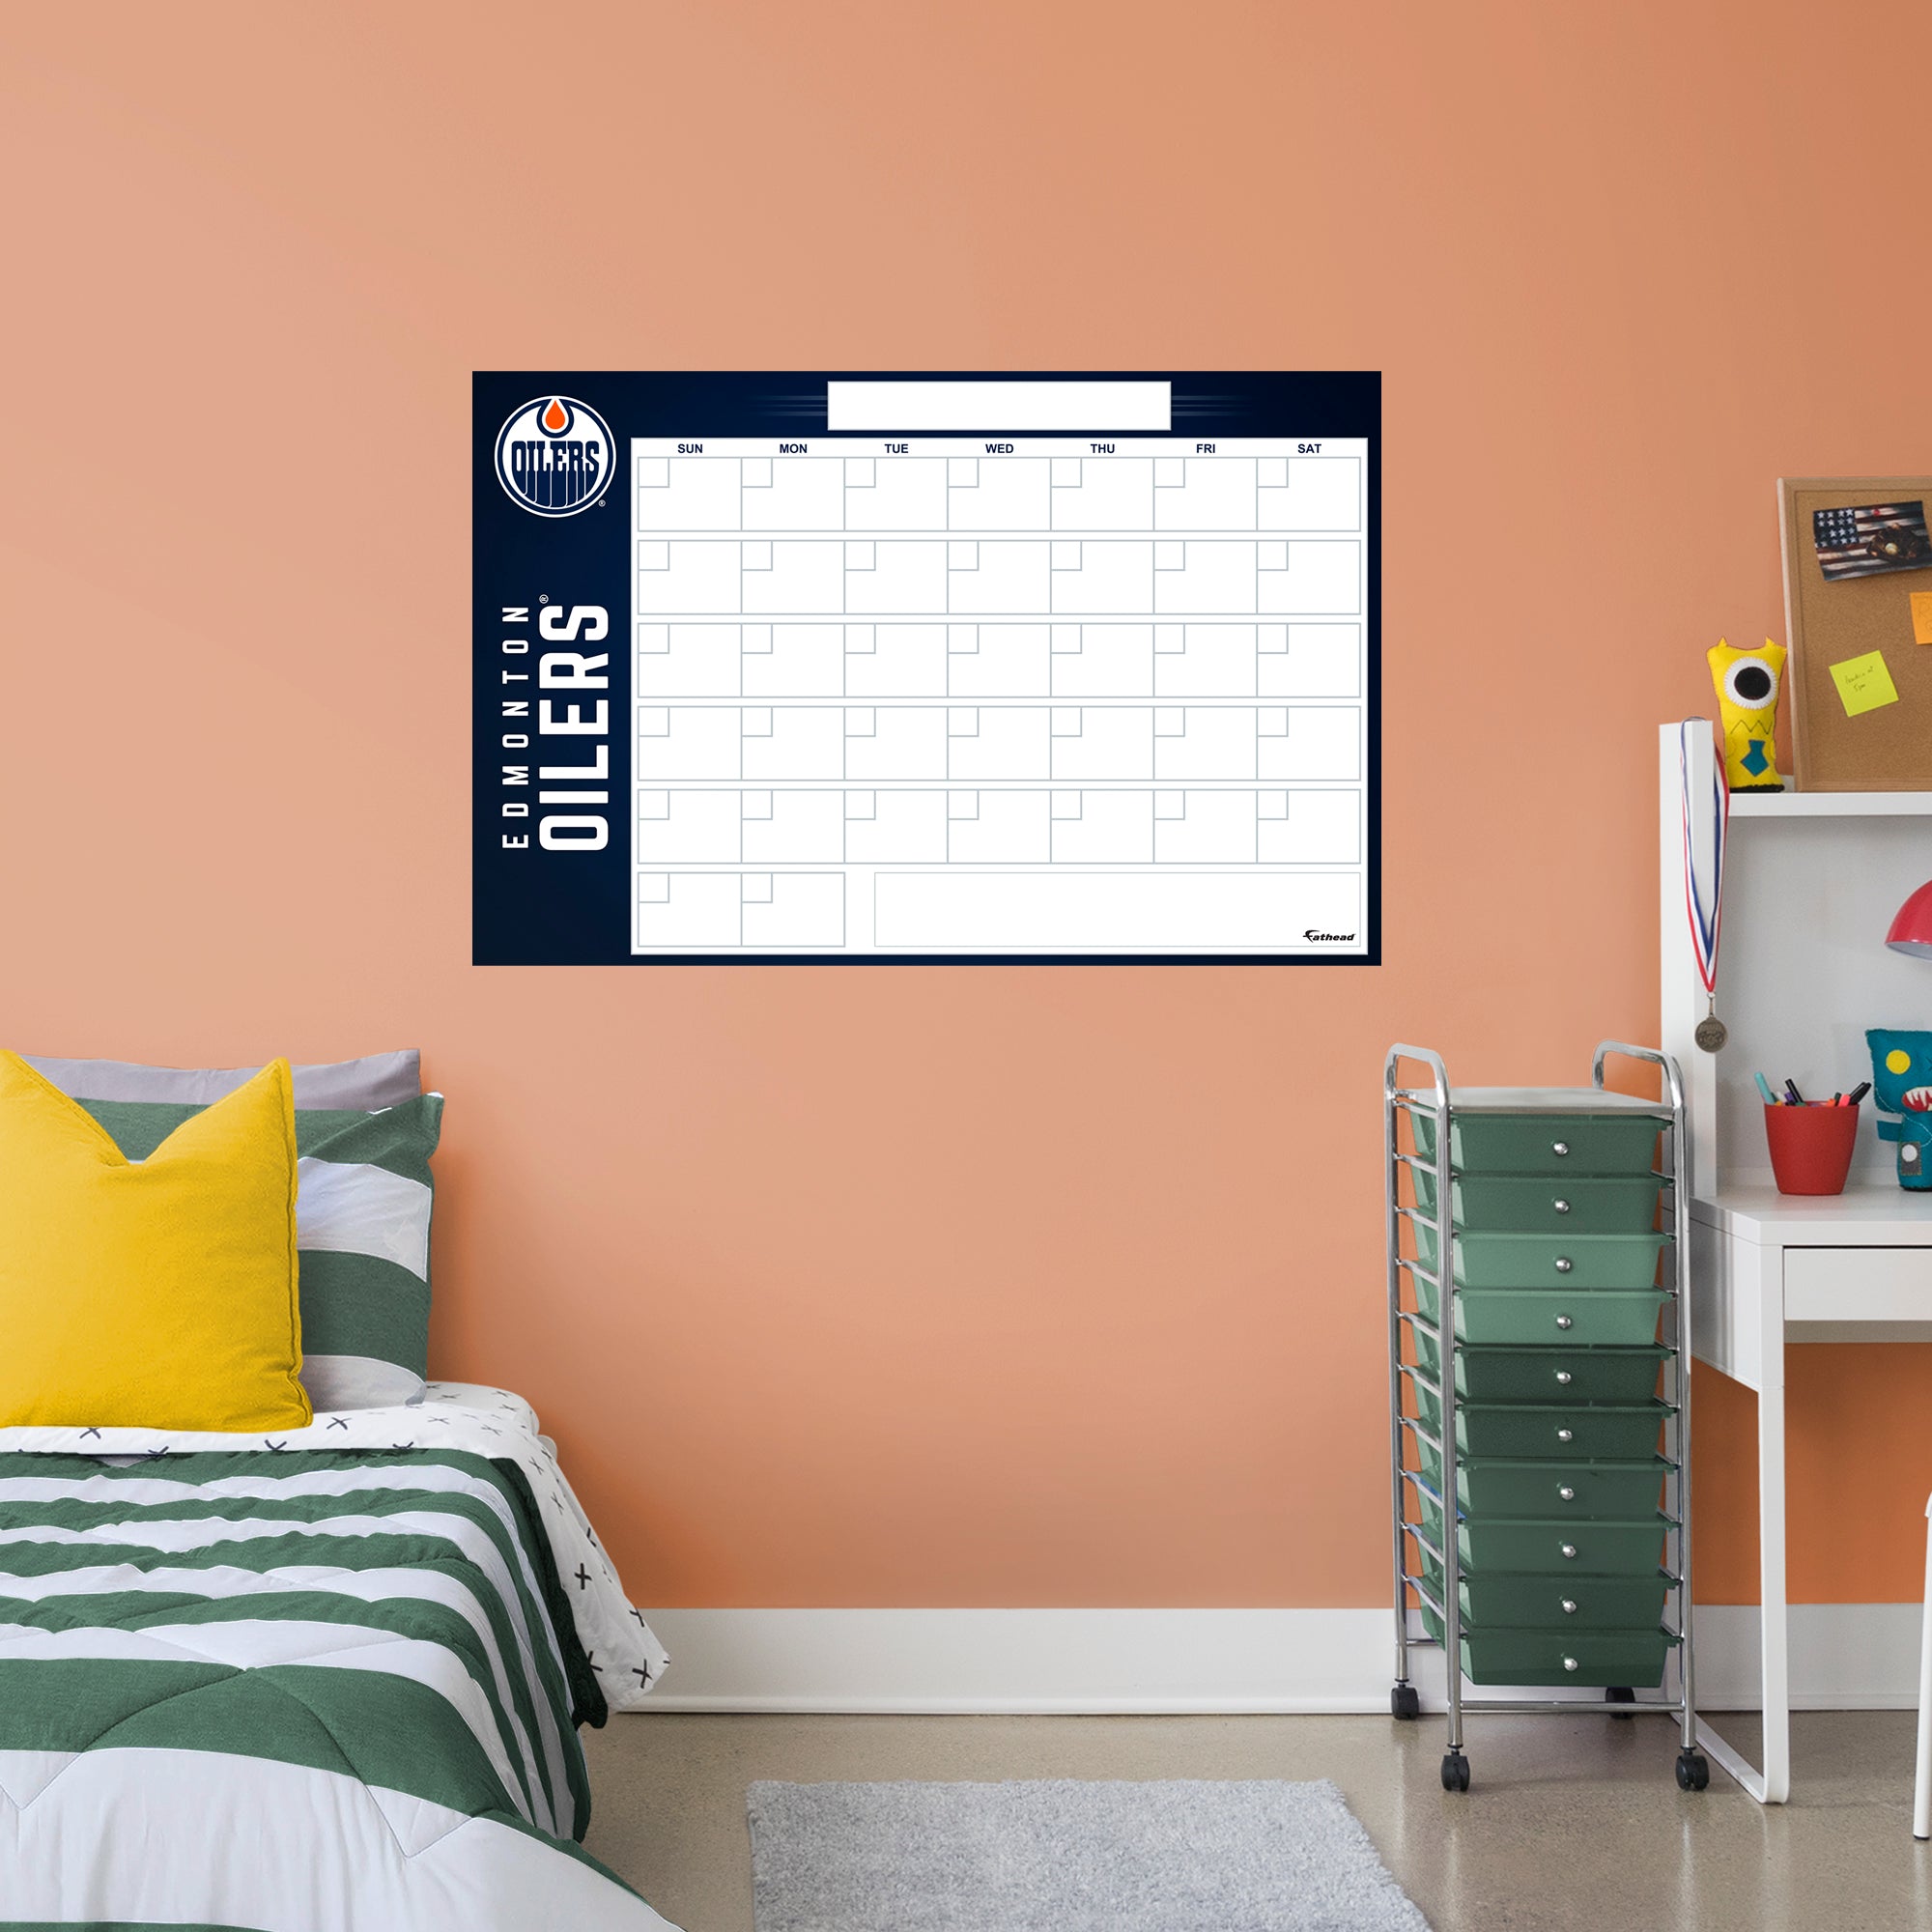 Edmonton Oilers Dry Erase Calendar - Officially Licensed NHL Removable Wall Decal Giant Decal (57"W x 34"H) by Fathead | Vinyl